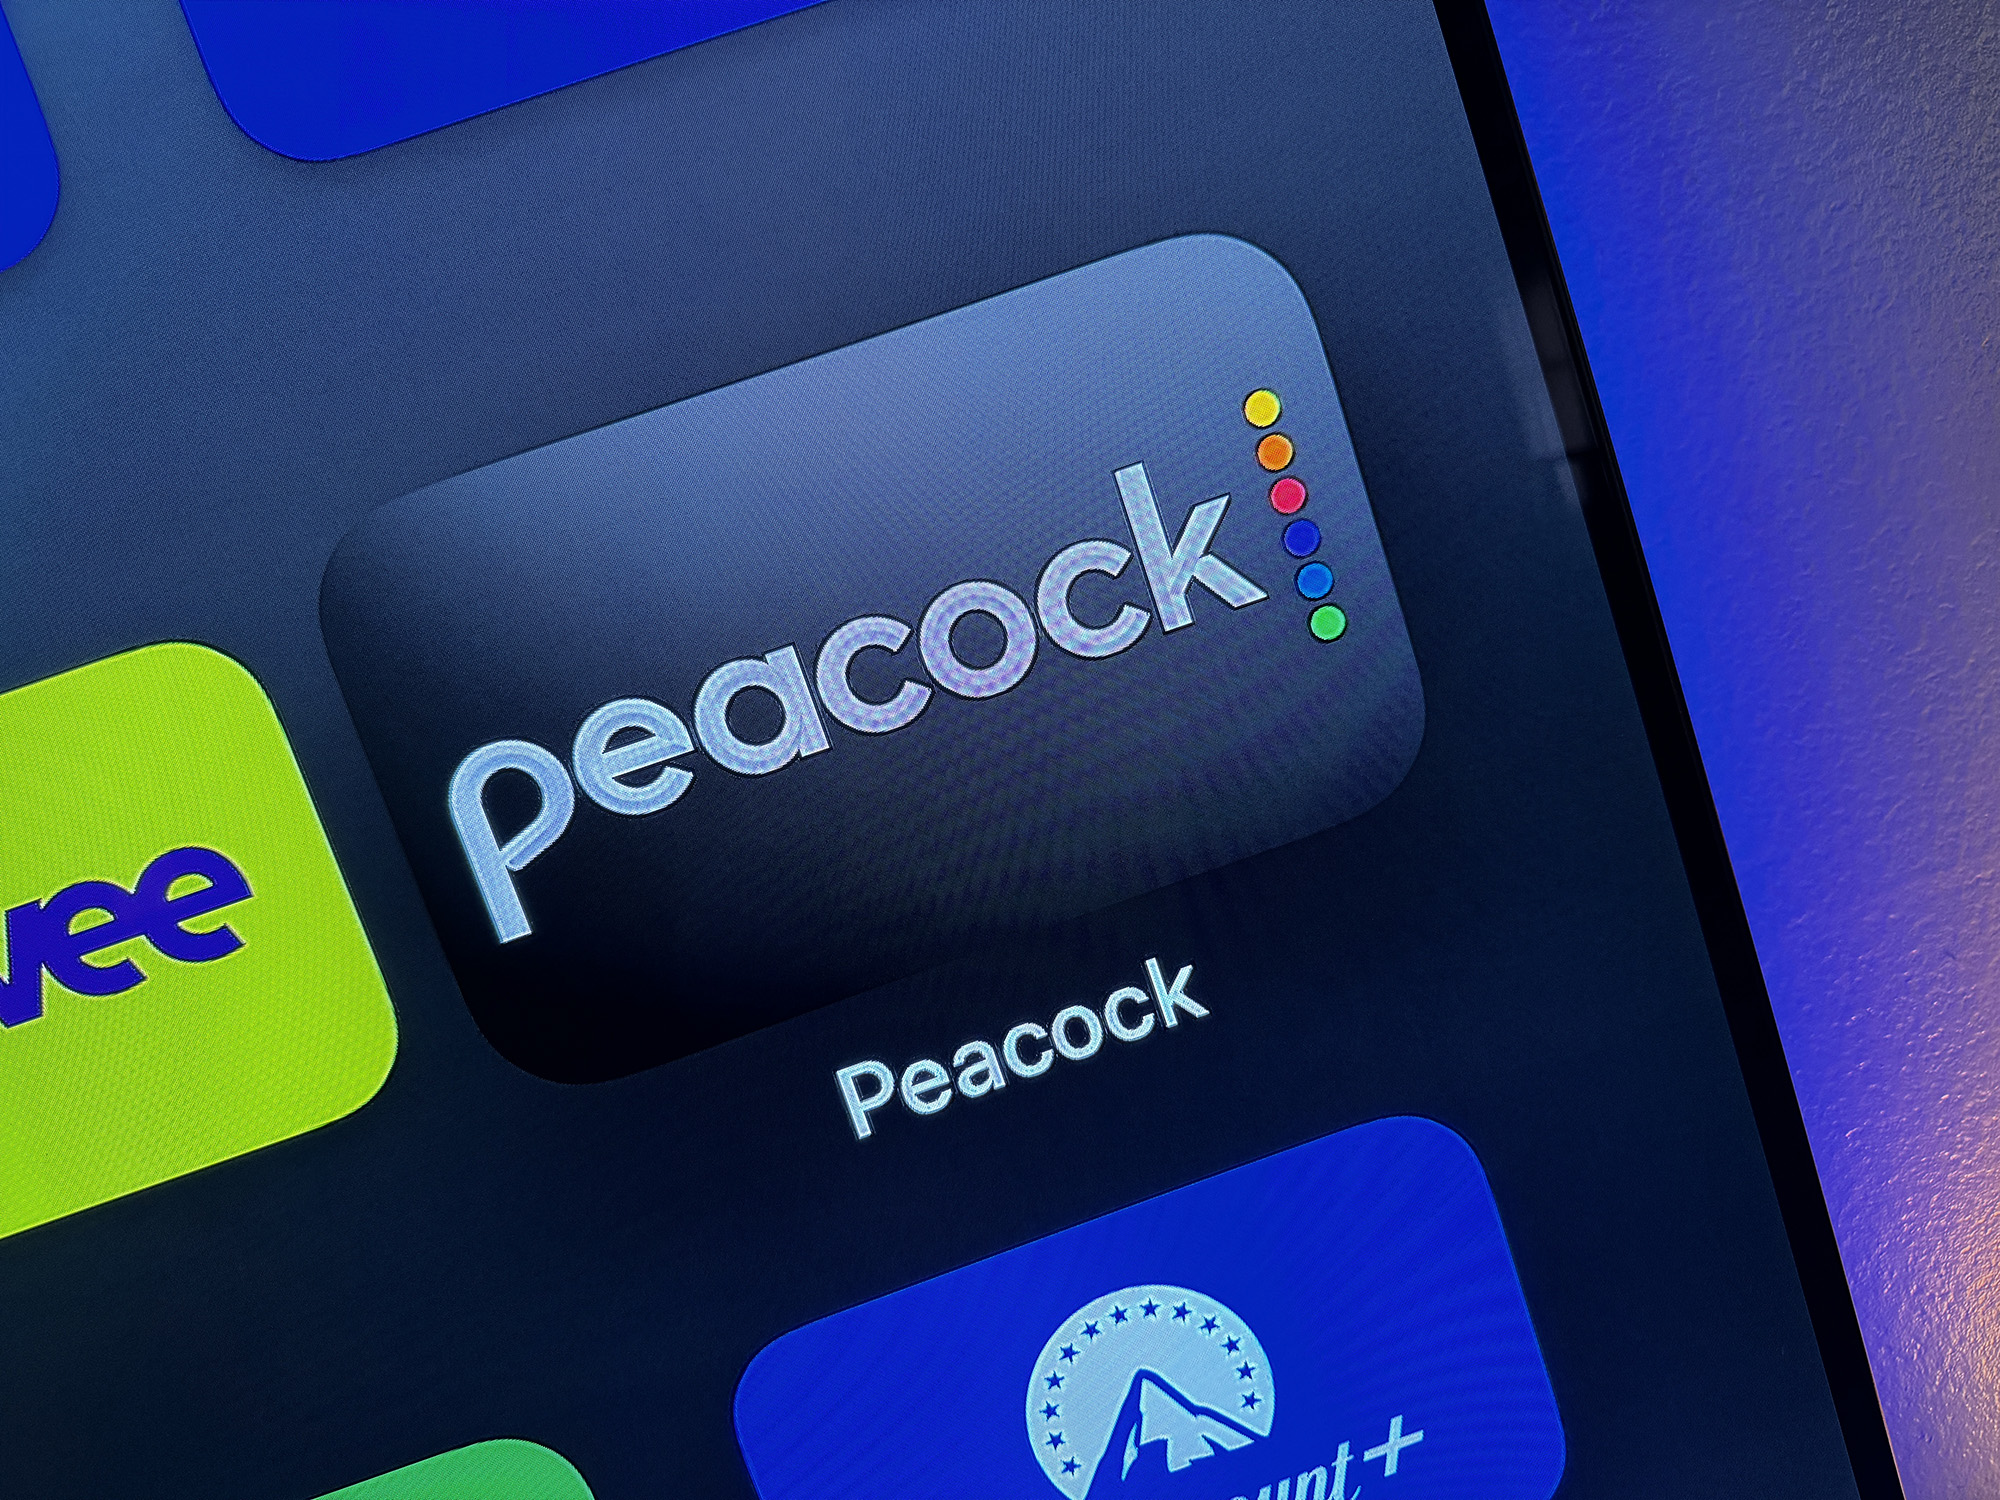 The Peacock <a href='https://termin-app-online.de/lifestyle-tipps-fuer-ein-besseres-leben' target='_blank'>app</a> icon on Apple TV.”><figcaption id=